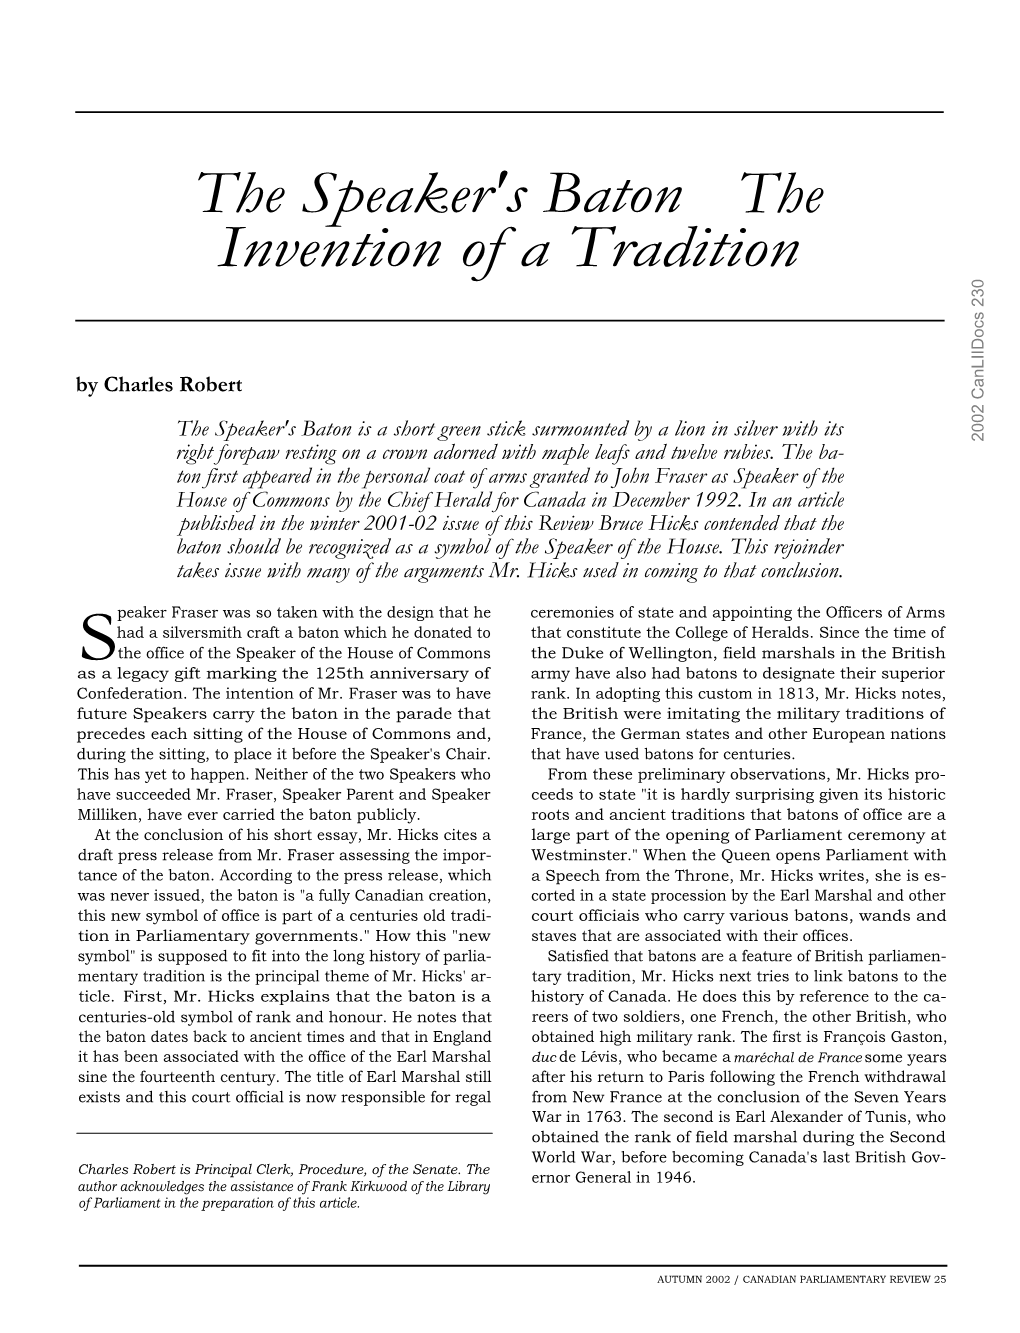 The Speaker's Baton the Invention of a Tradition